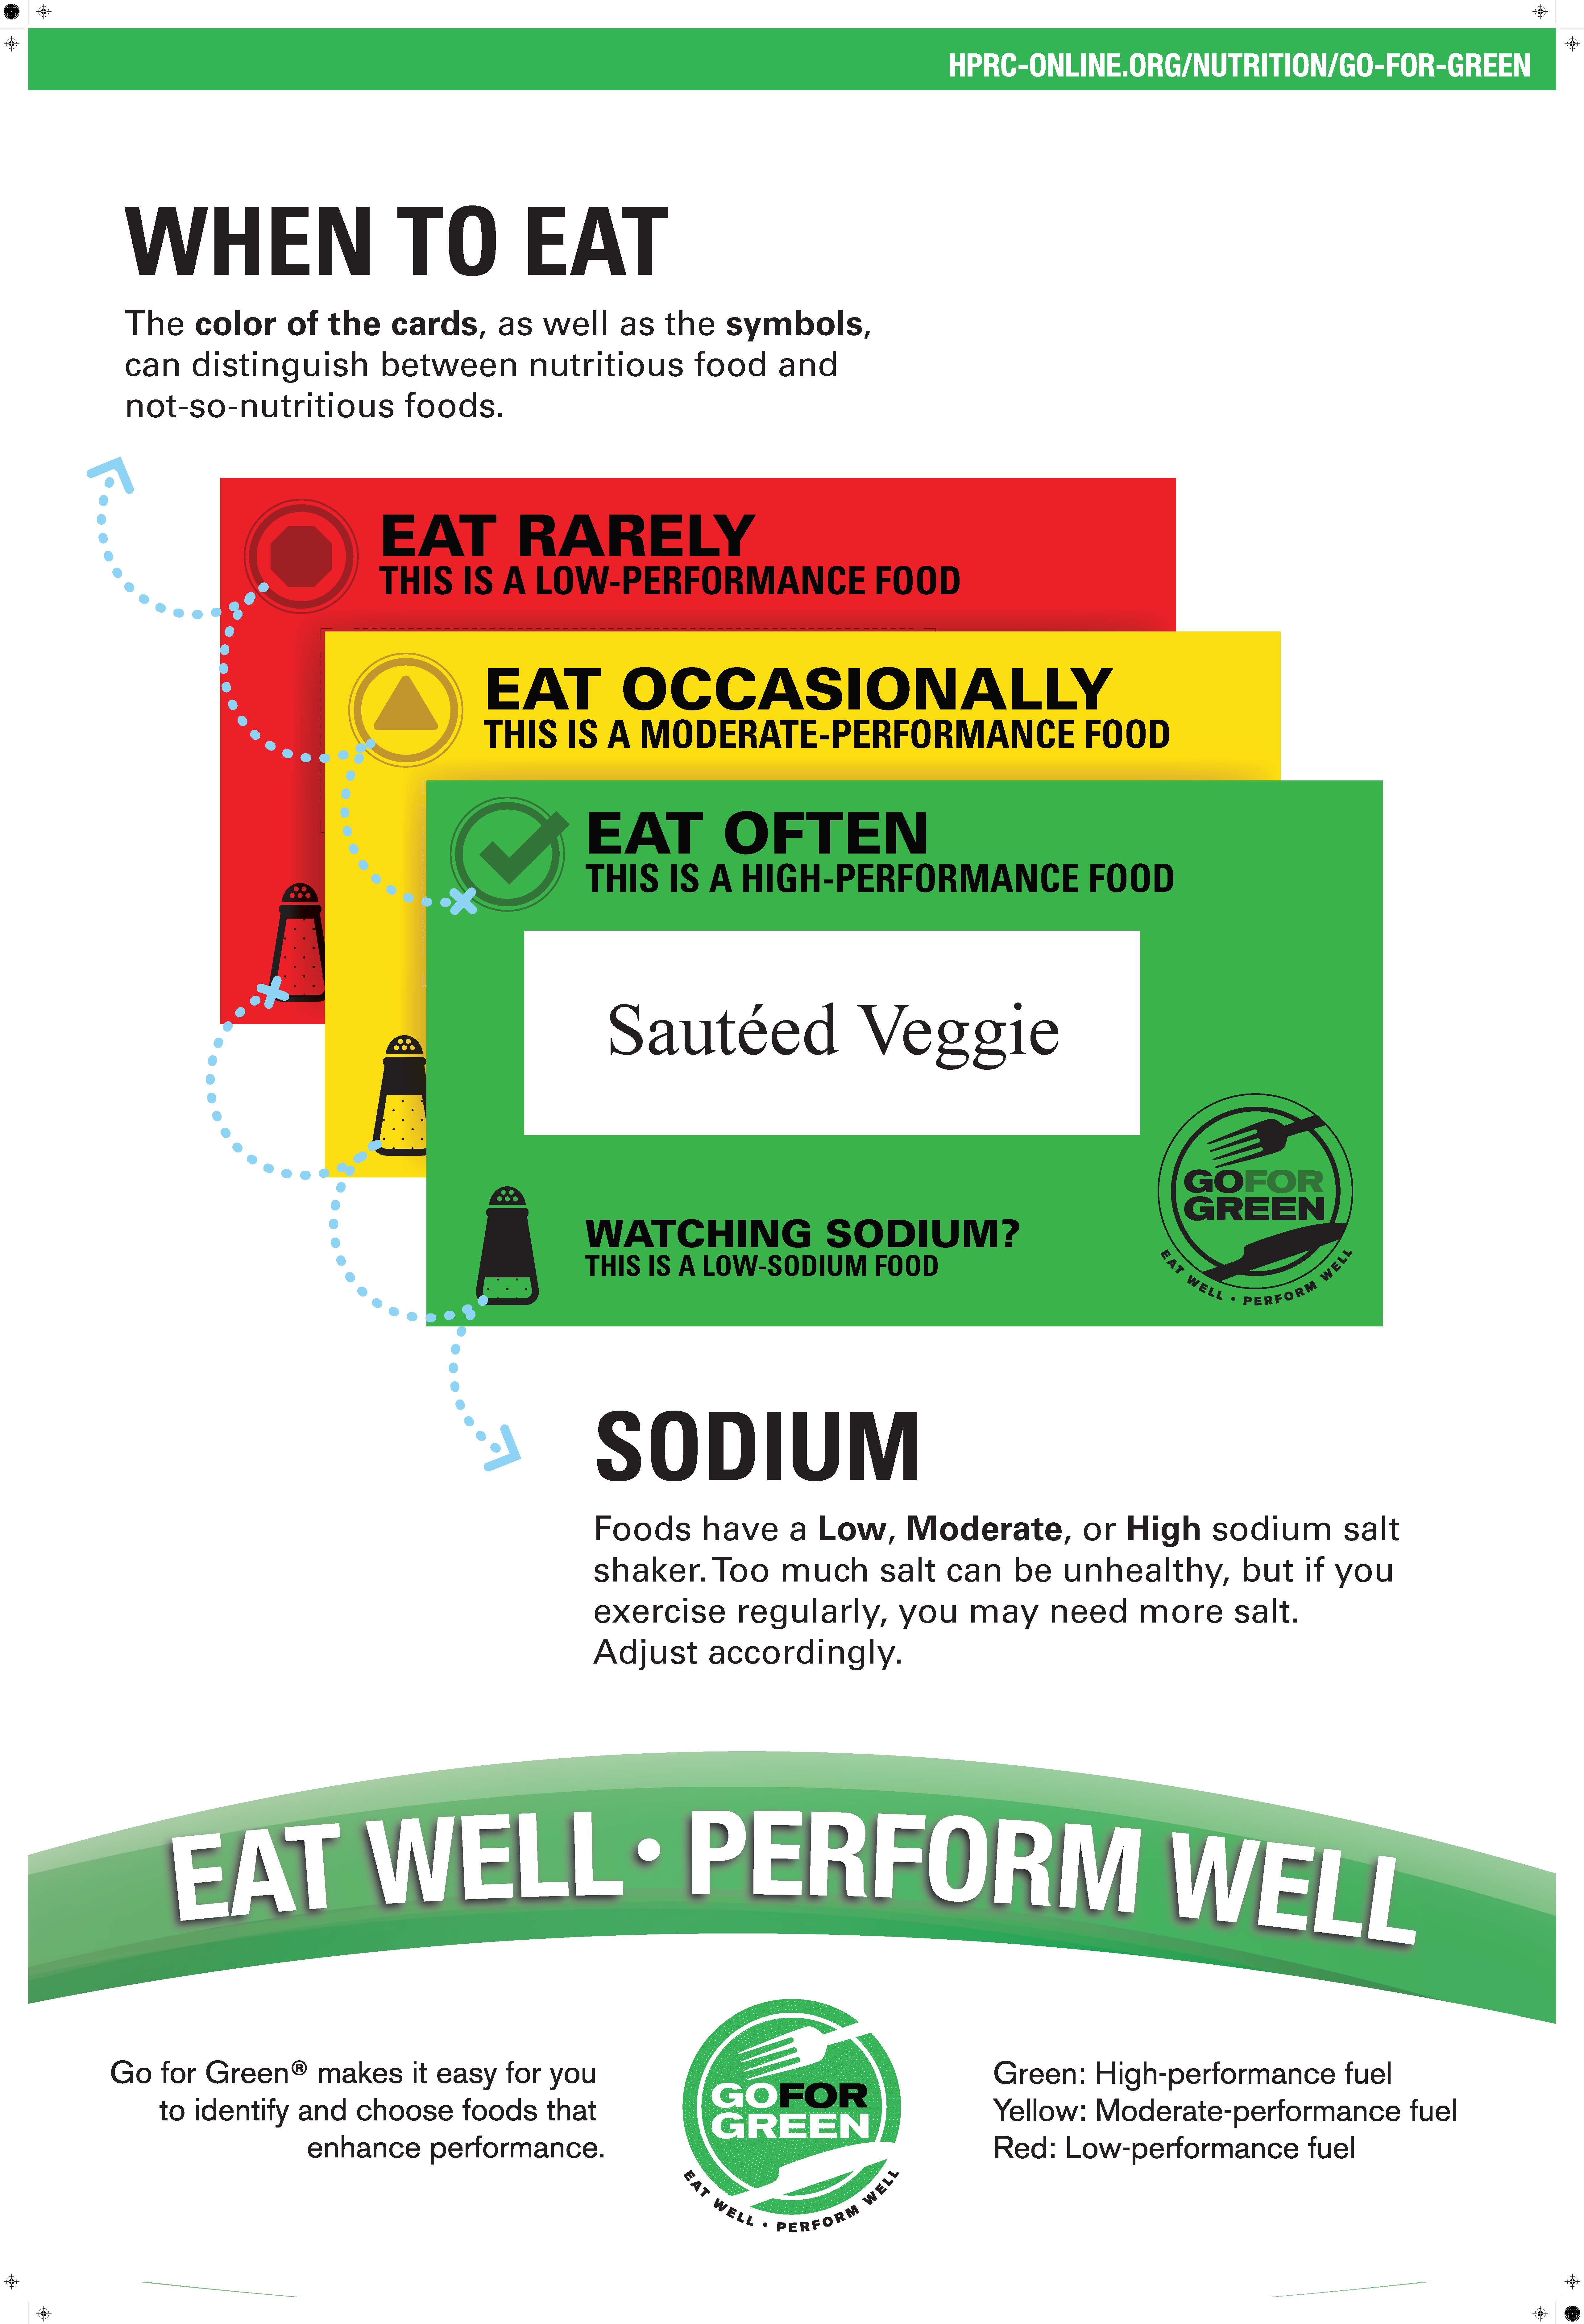 food-cards-hprc